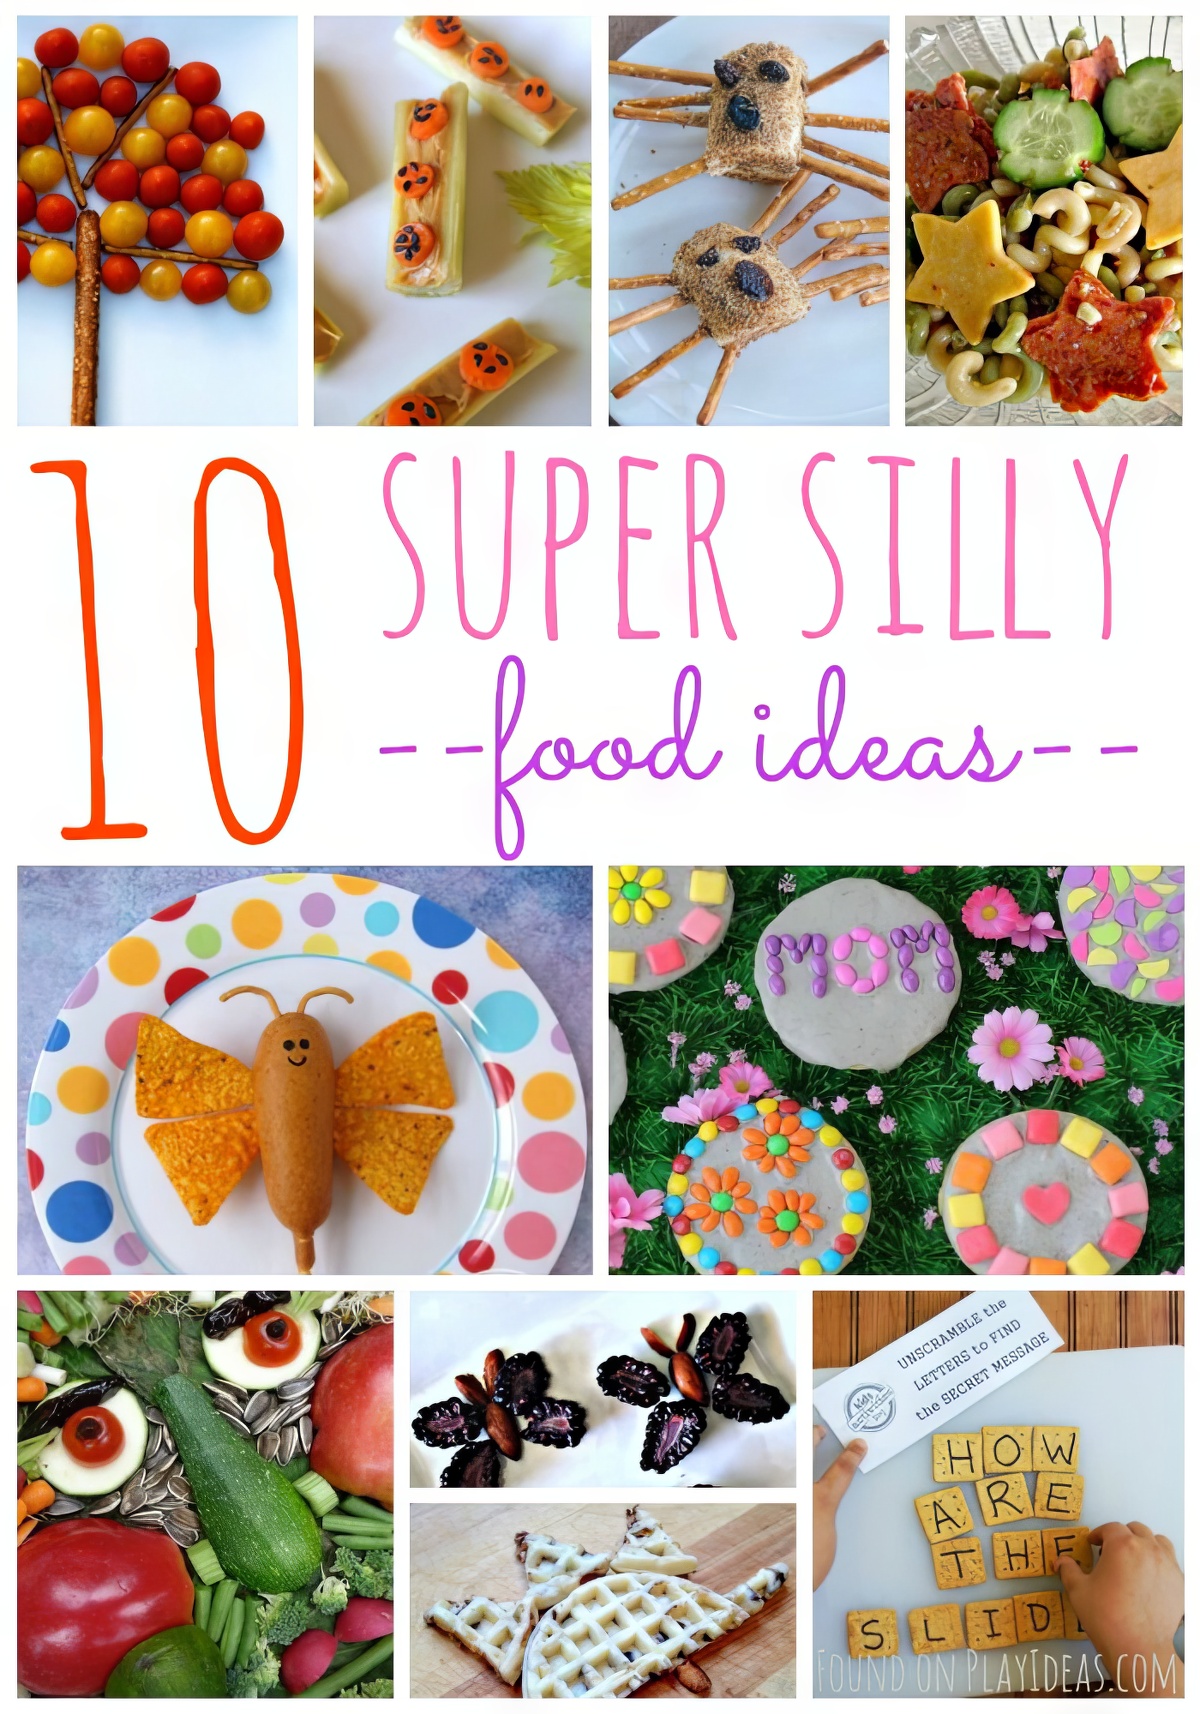 Kids of all ages will surely love this 10 super silly food ideas! 